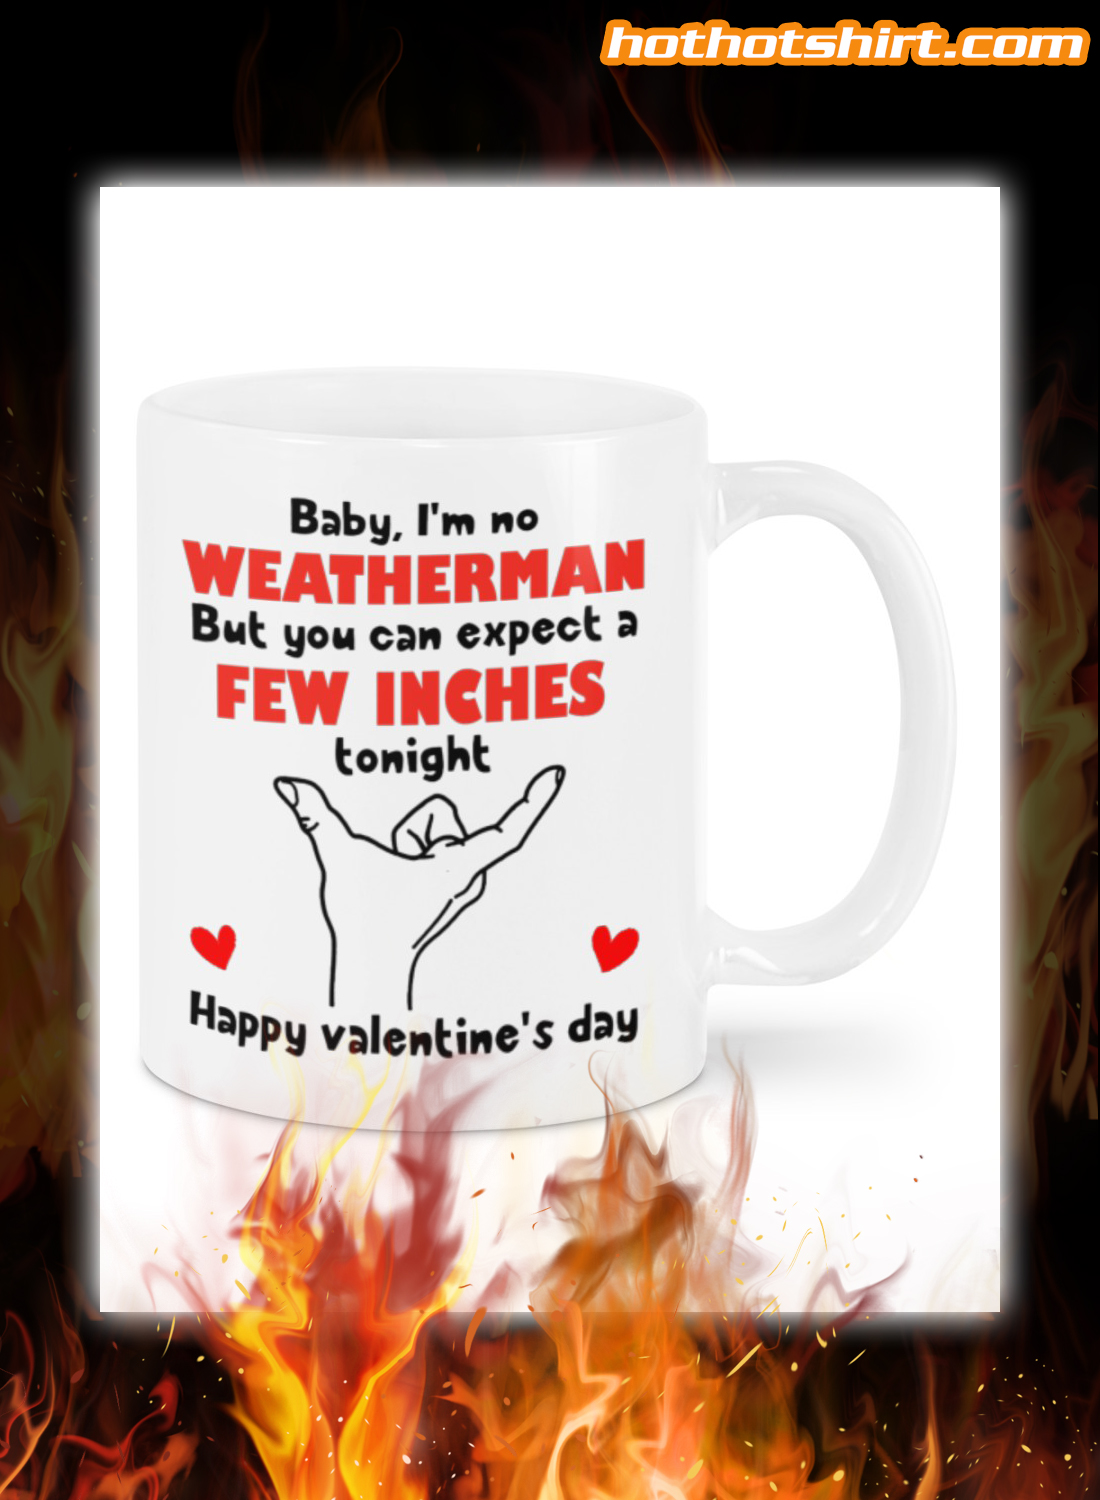 Baby I'm no weatherman but you can expect a few inches tonight happy valentine's day mug